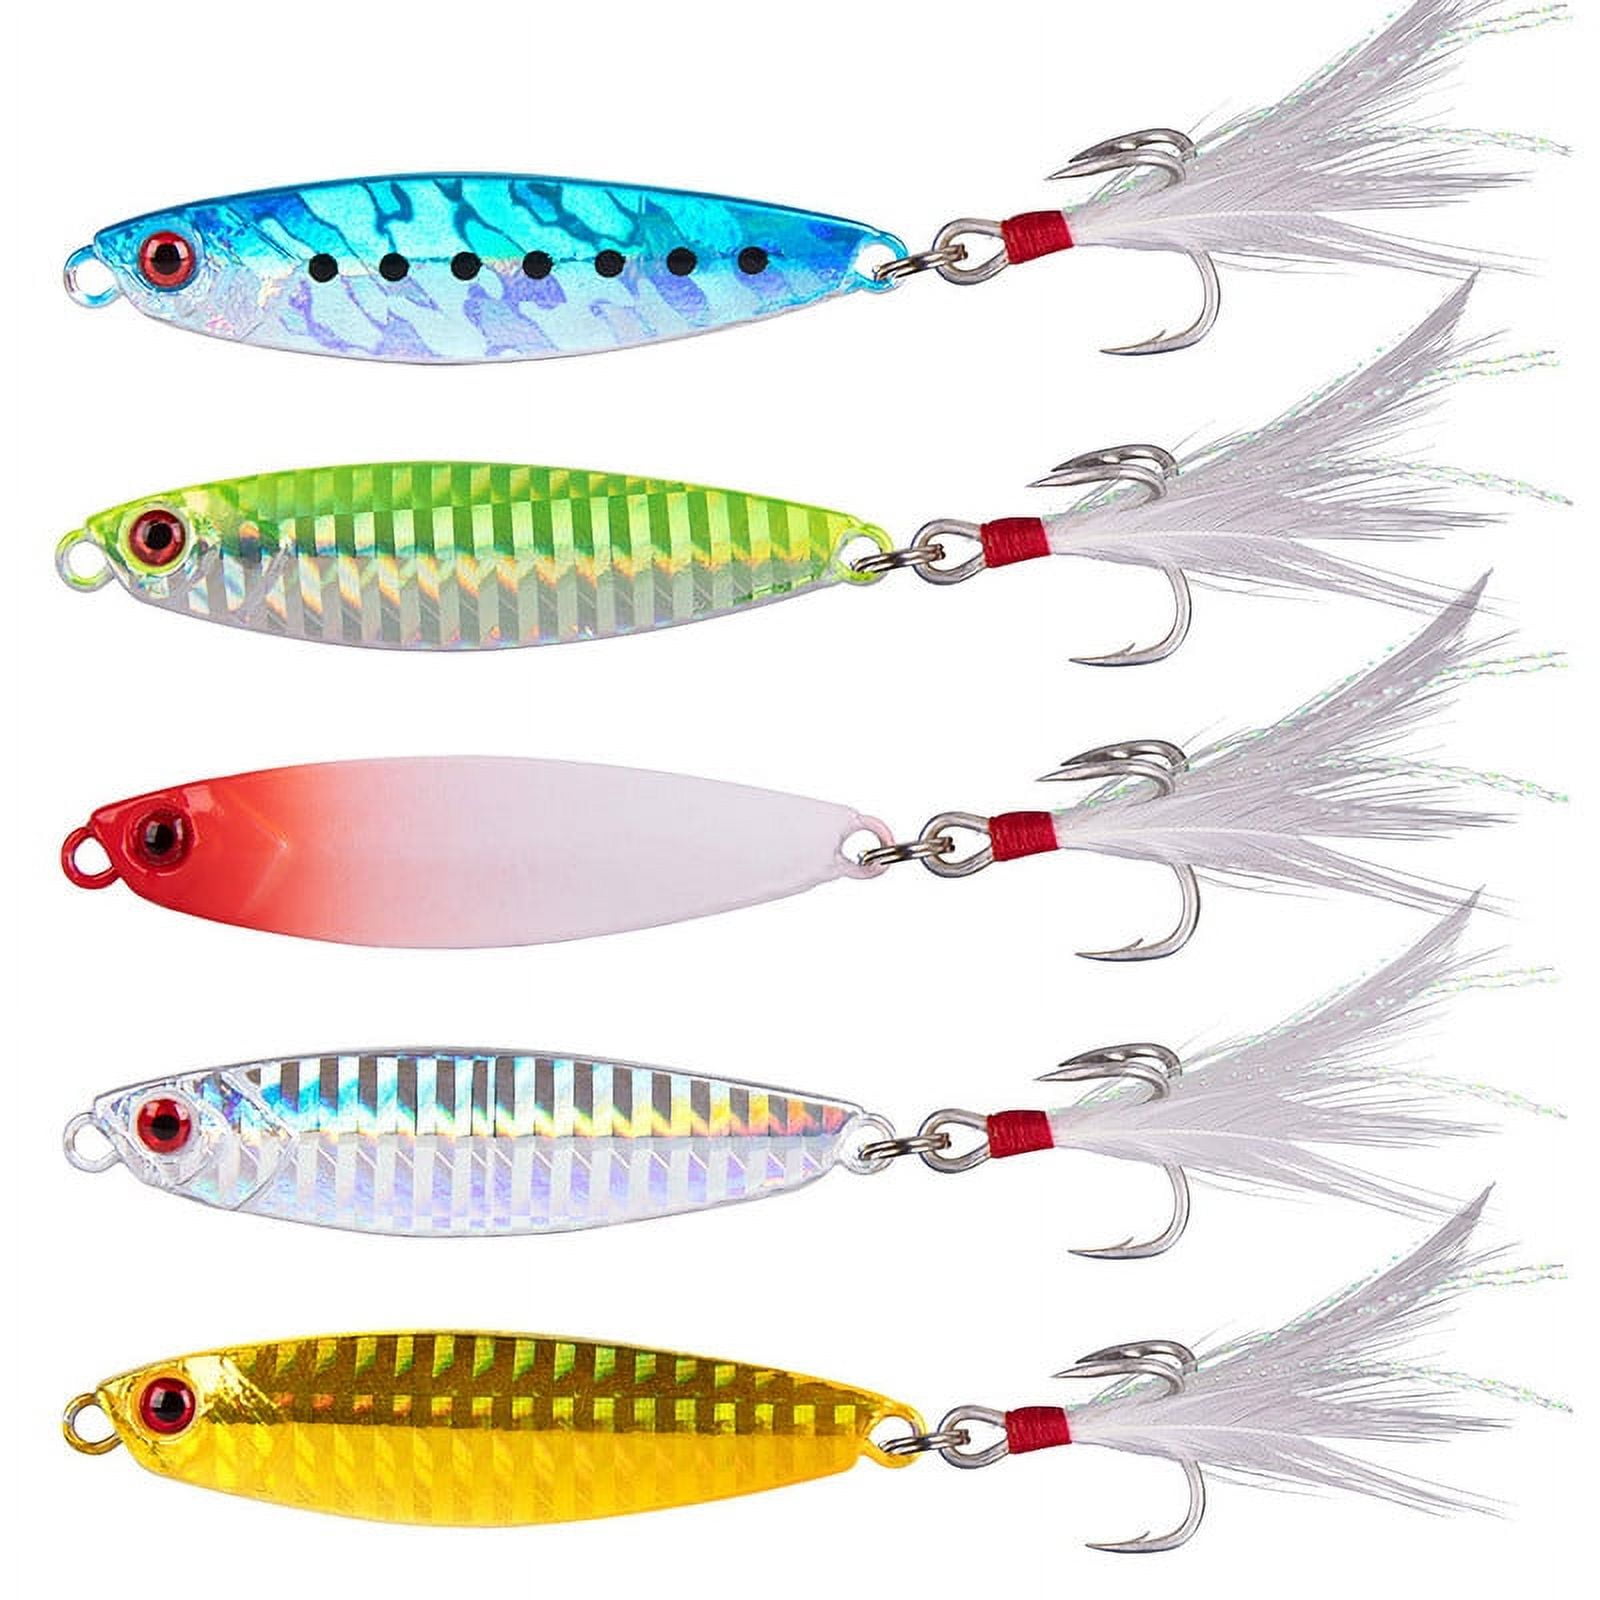 Dr.Fish Jigs Fishing Lures spoon 5 Pack 9/10 oz For Bass Sinking Metal  Spoons 3D Eyes Bright Color Micro Jigs Trolling Spoon in Plastic Box 